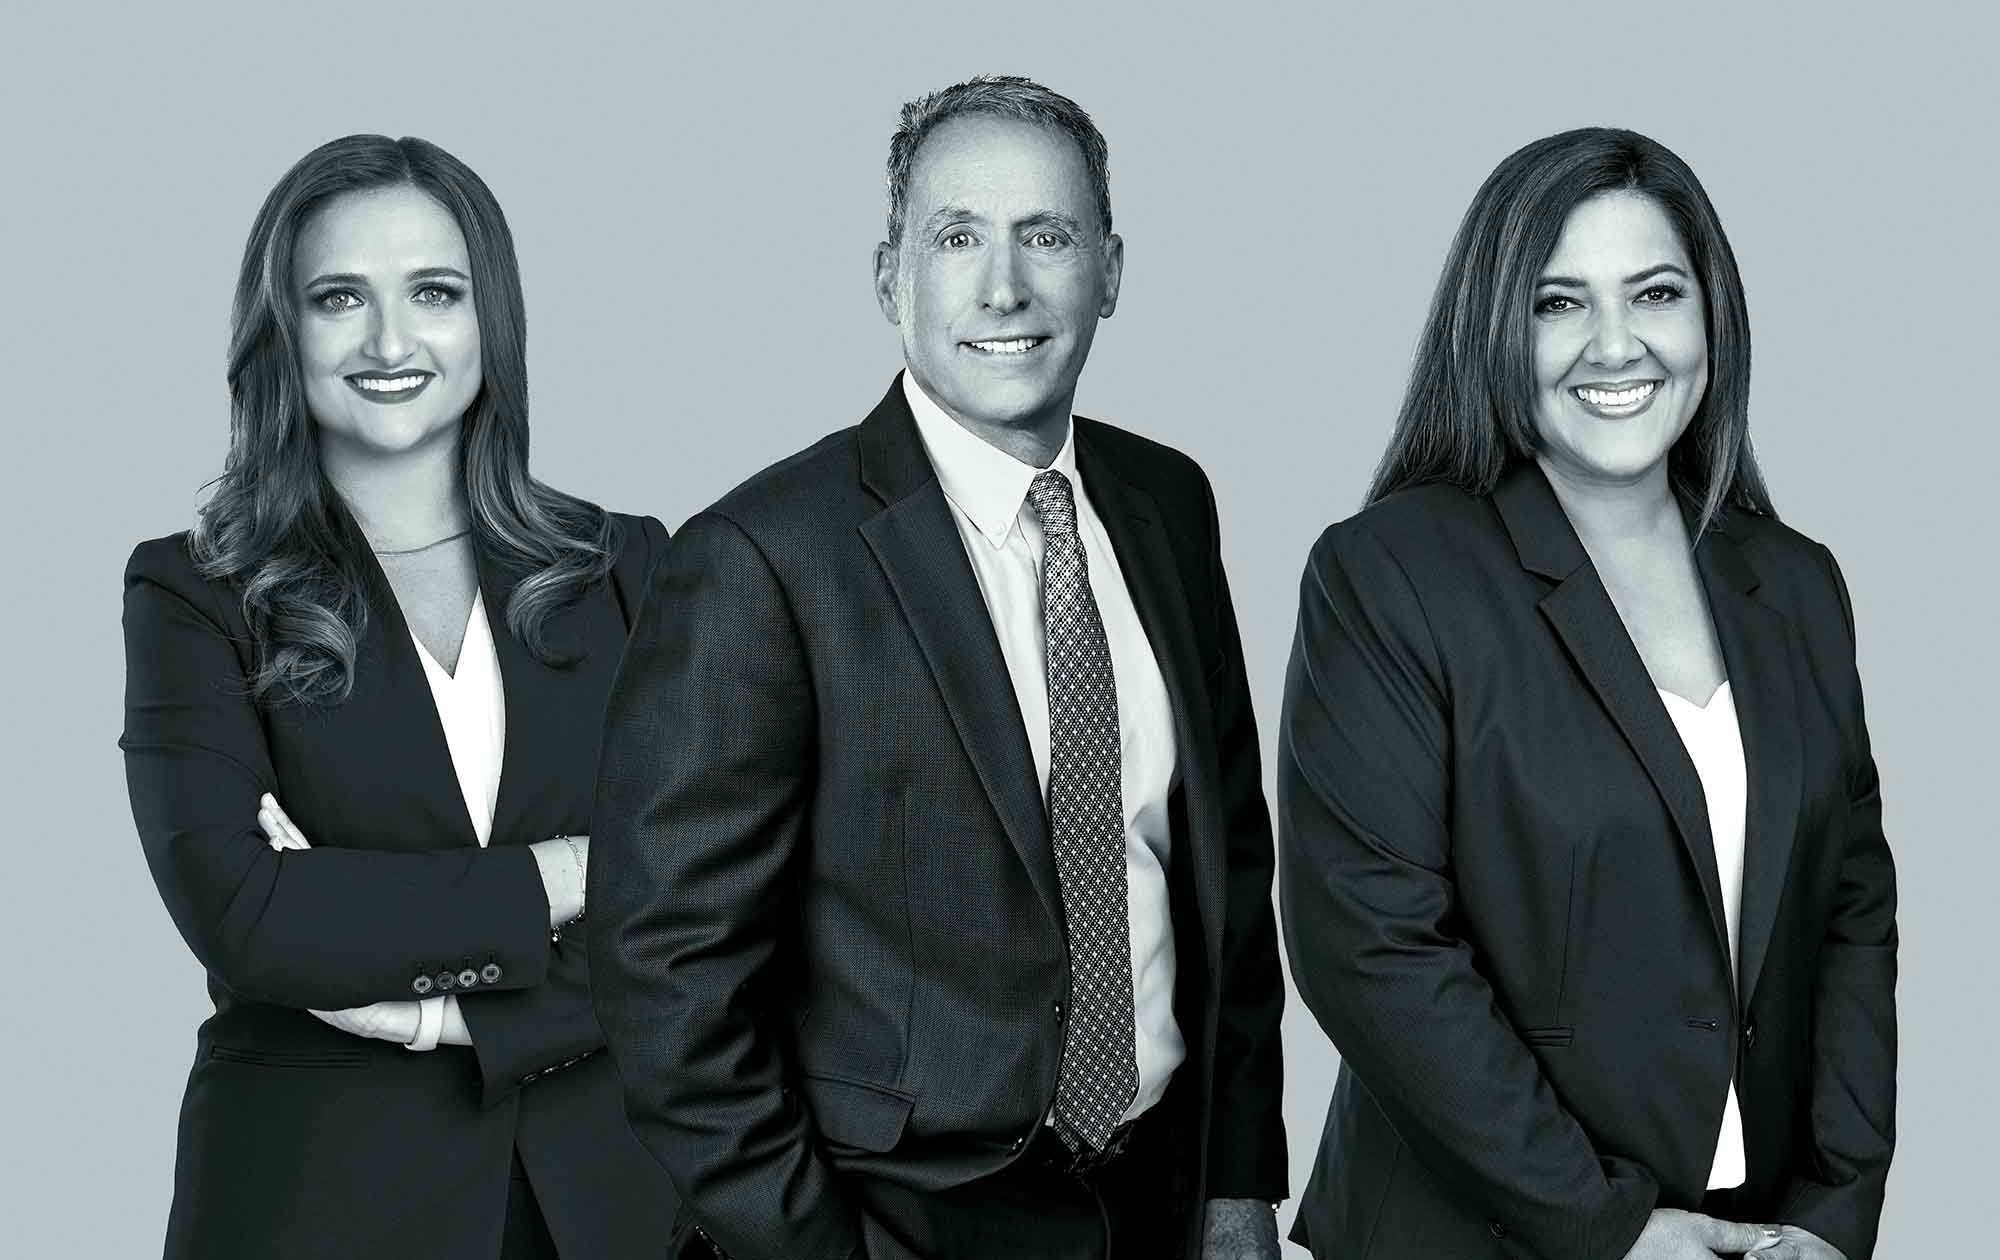 California nursing license defense attorneys Robert K. Weinberg, Suzanne Crouts, and Melissa DuChene represent nurses in California with the Board of Registered Nursing, Board of Vocational Nursing and Psychiatric Technicians, and Department of Consumer Affairs.